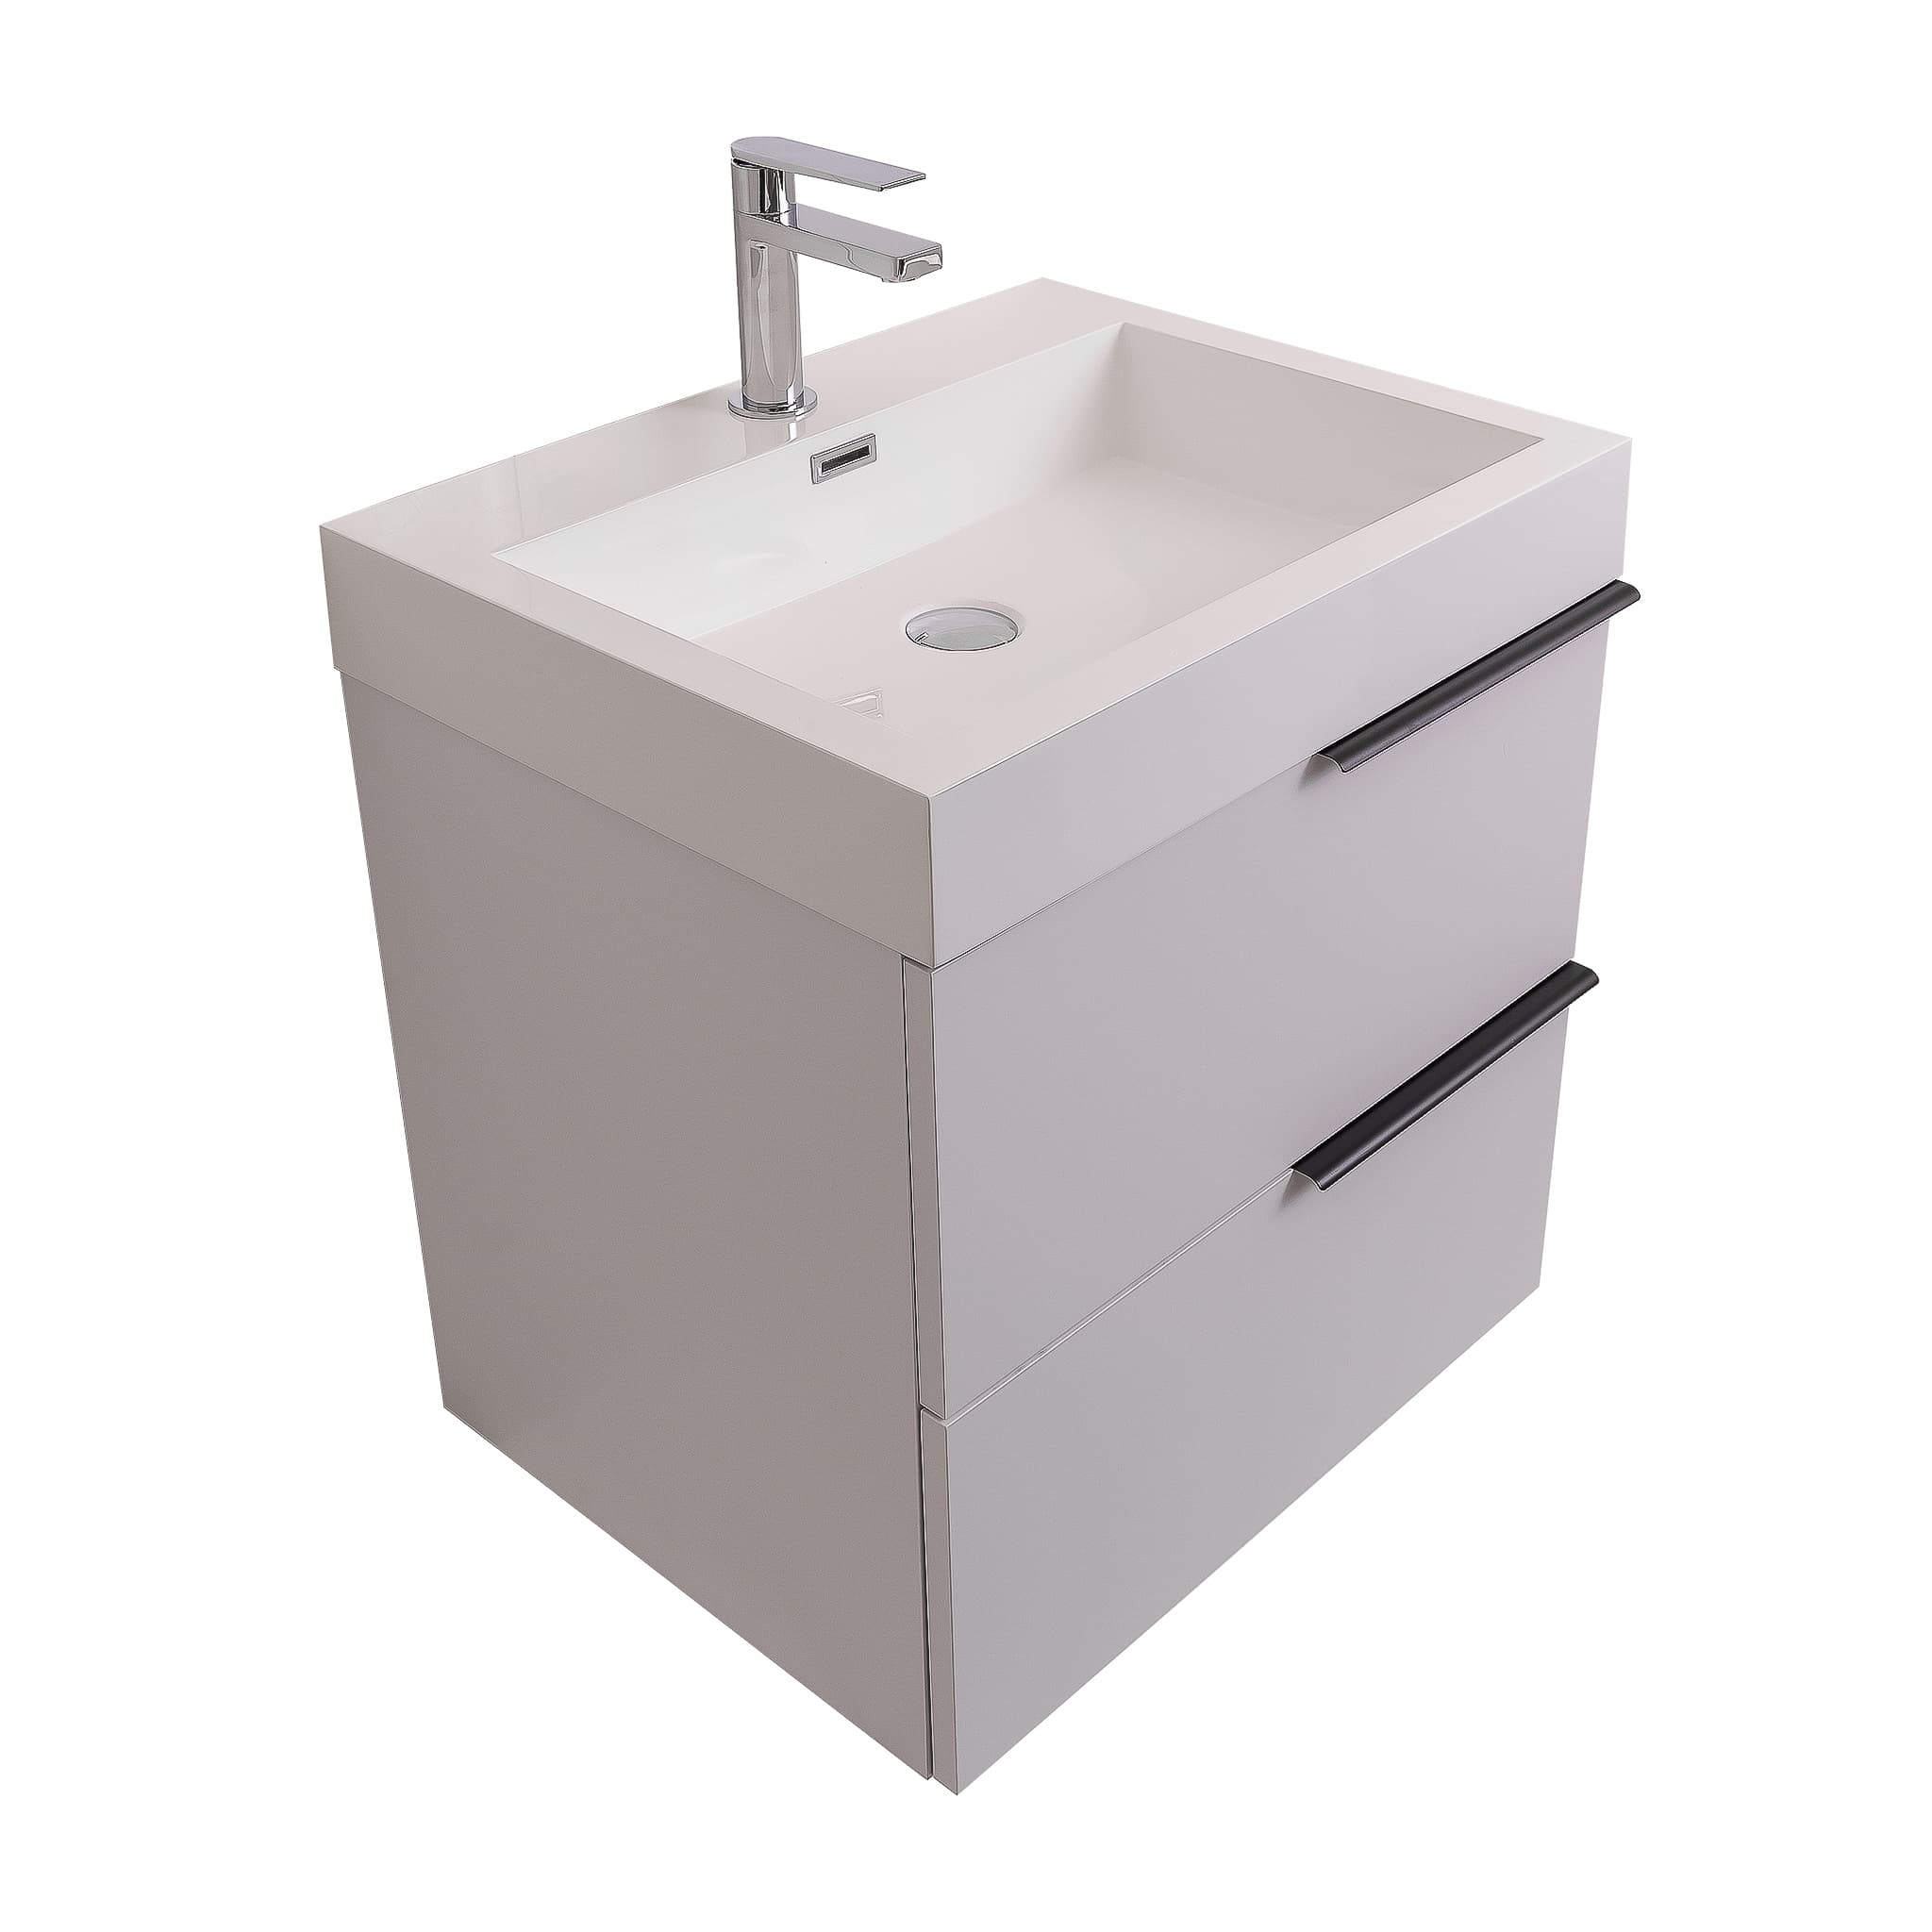 Mallorca 23.5 Matte White Cabinet, Square Cultured Marble Sink, Wall Mounted Modern Vanity Set